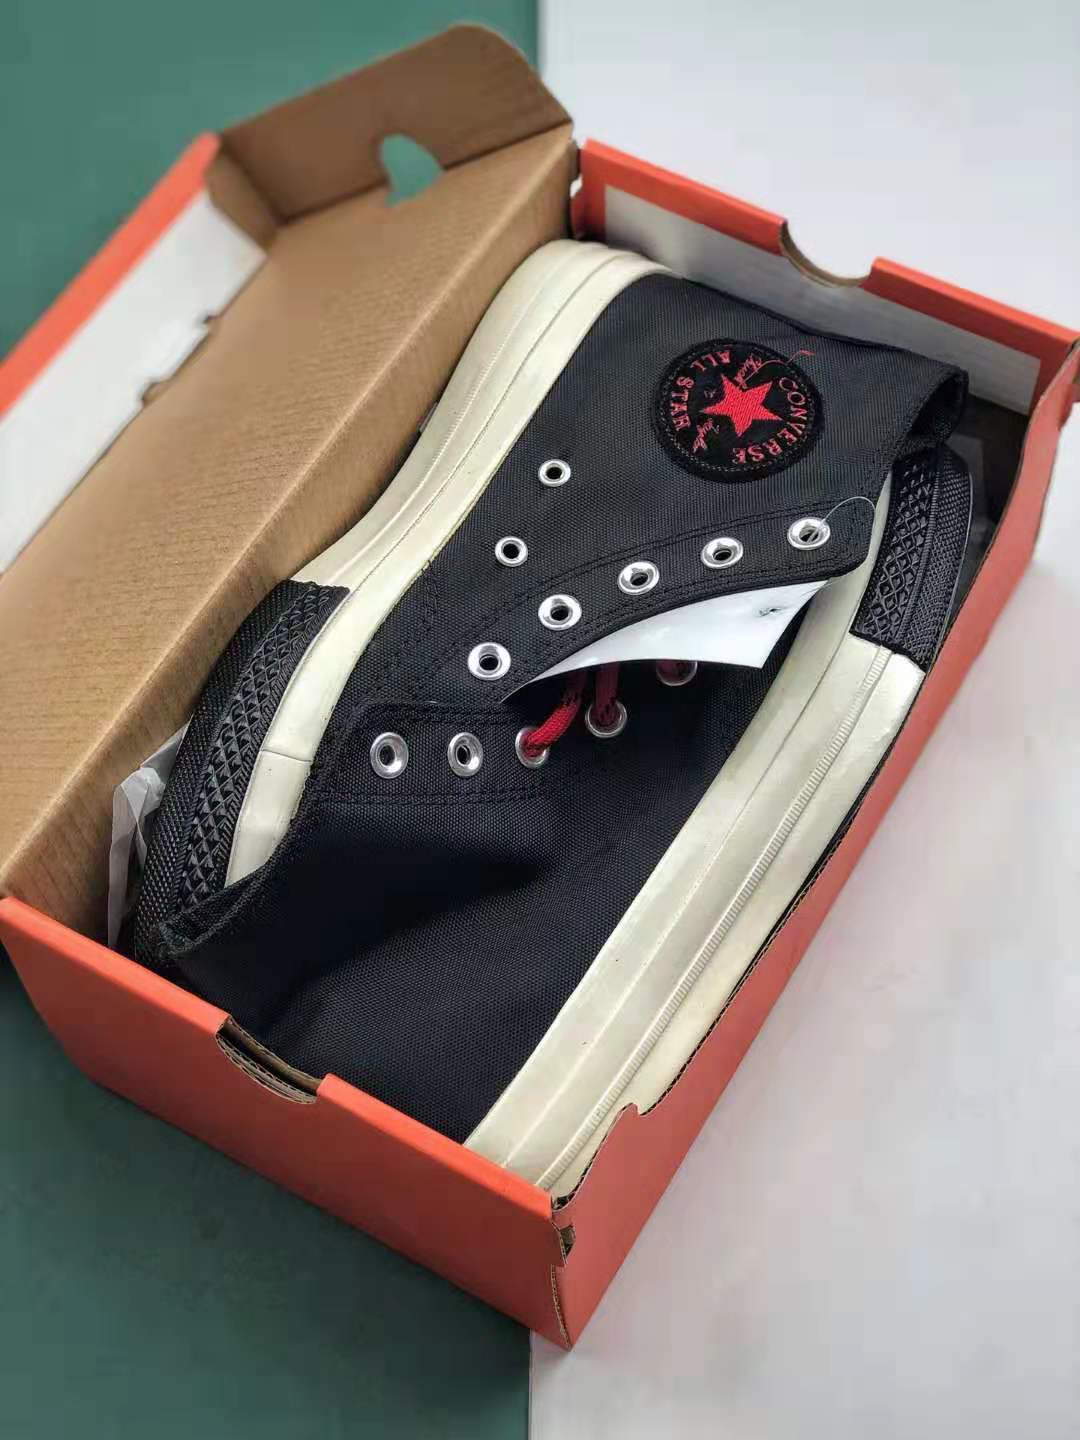 Converse Chuck 1970s Hi Red Black Sneakers - Limited Edition